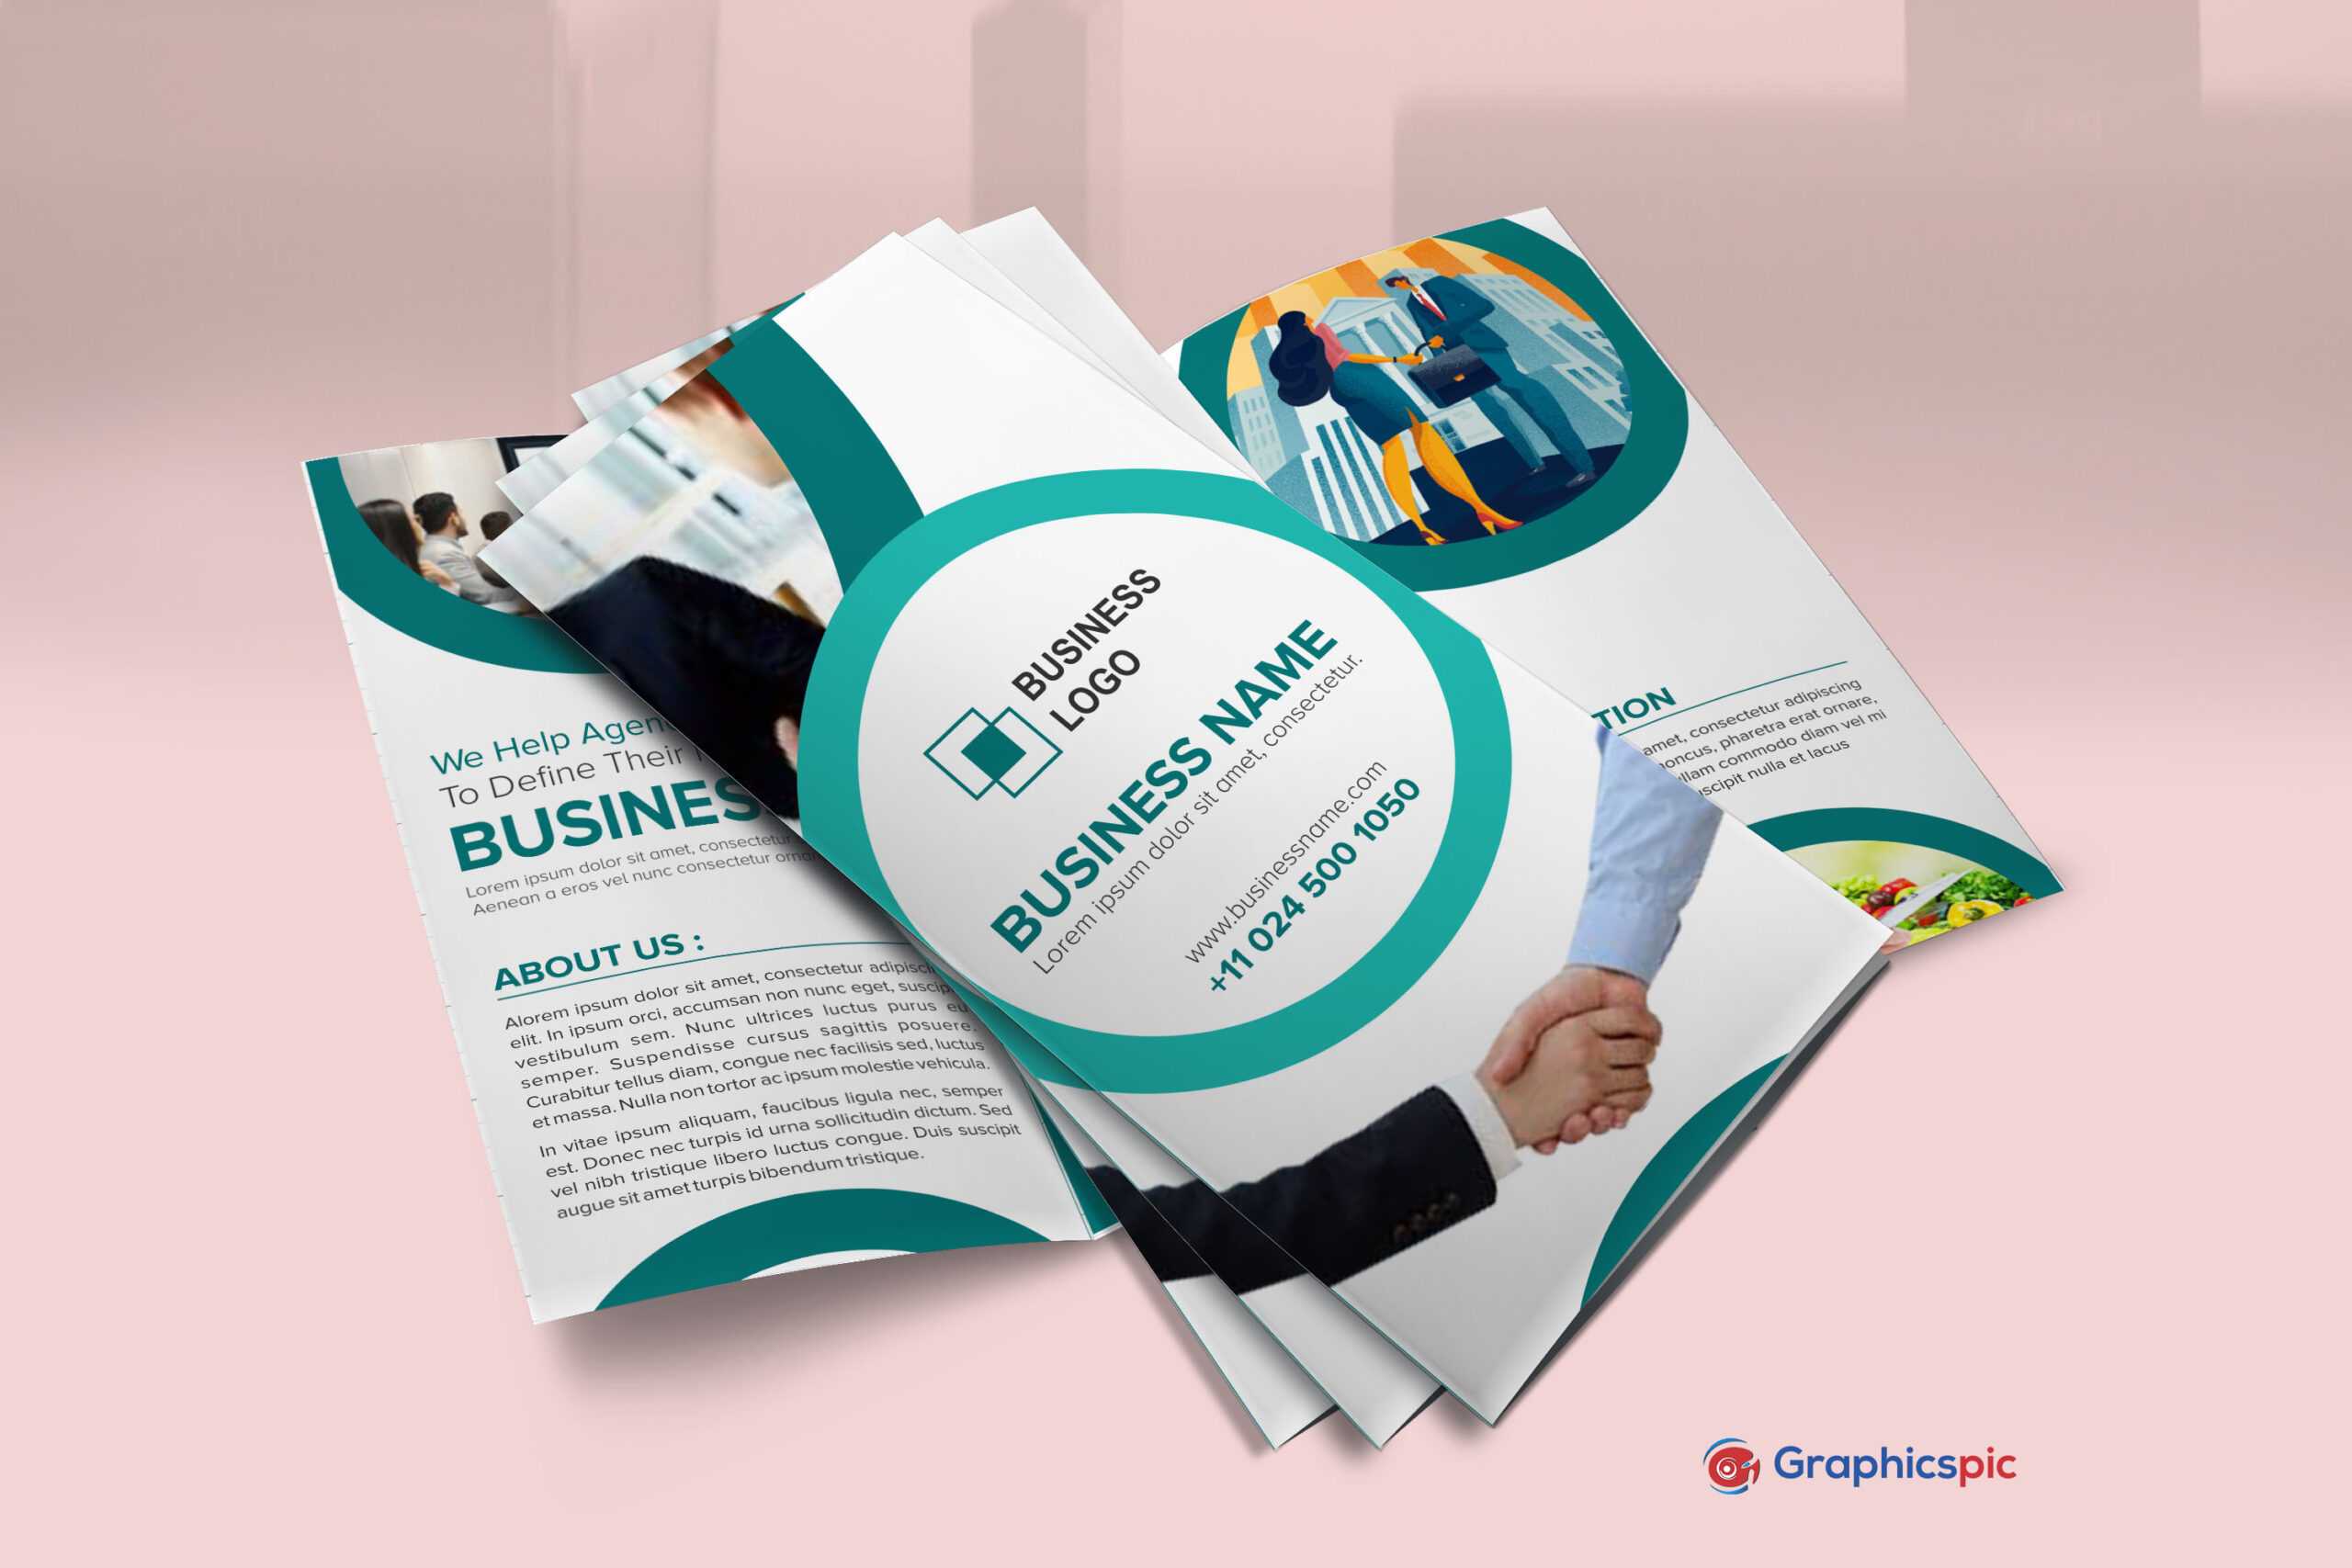 Free Download Brochure Templates Design For Events, Products In Free Brochure Template Downloads